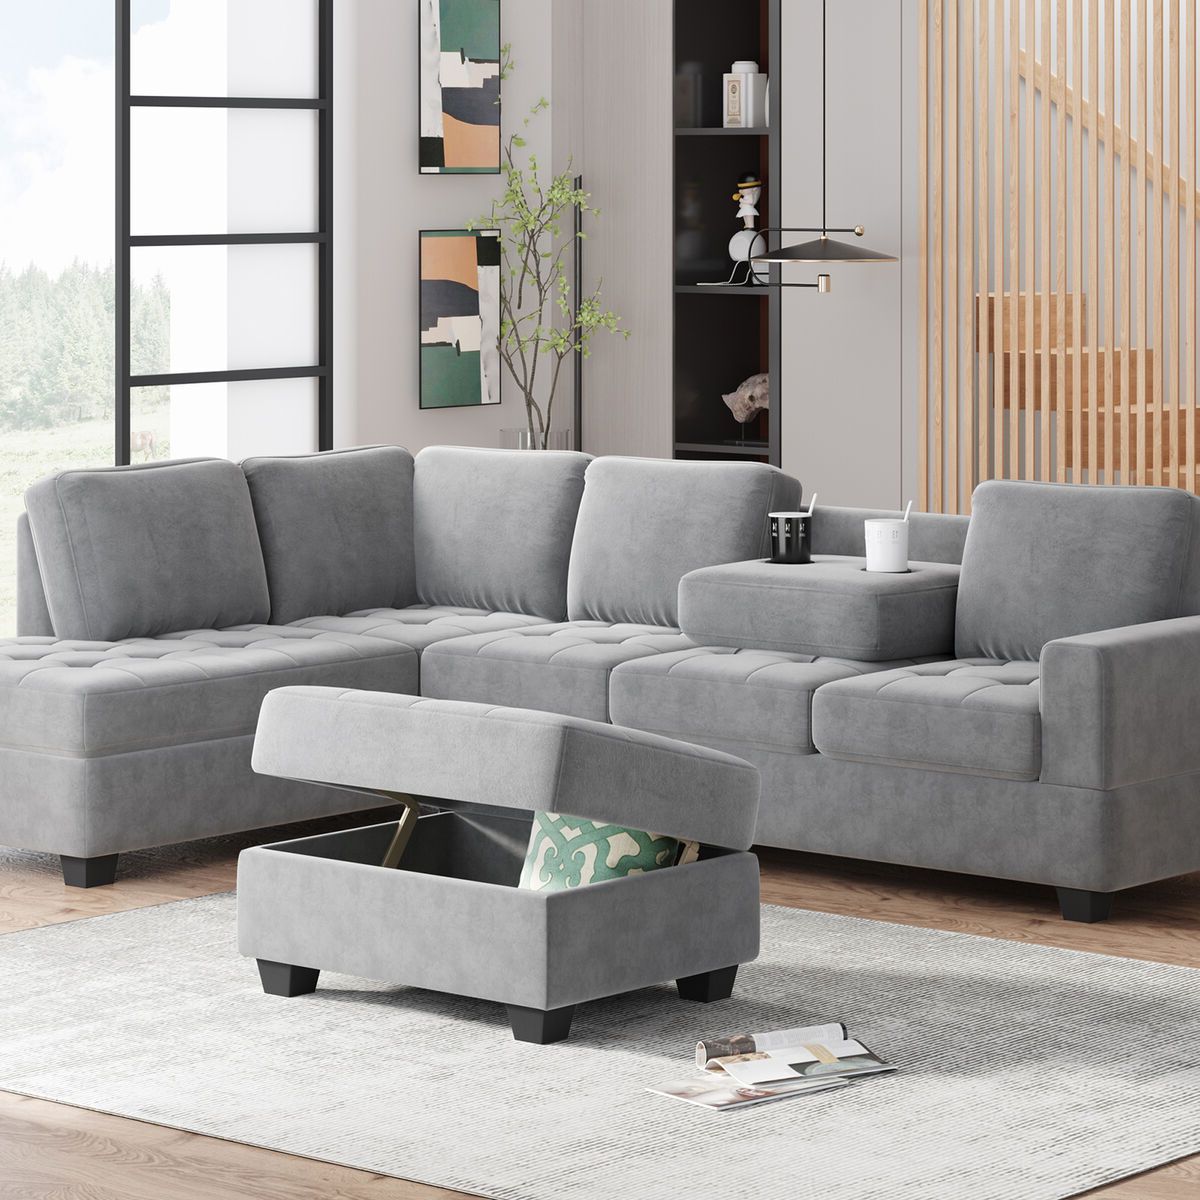 6 Seater L Shaped Sectional Sofa Couch W/ Reversible Chaise Storage  Ottomans Set | Ebay Intended For 6 Seater Sectional Couches (View 4 of 20)